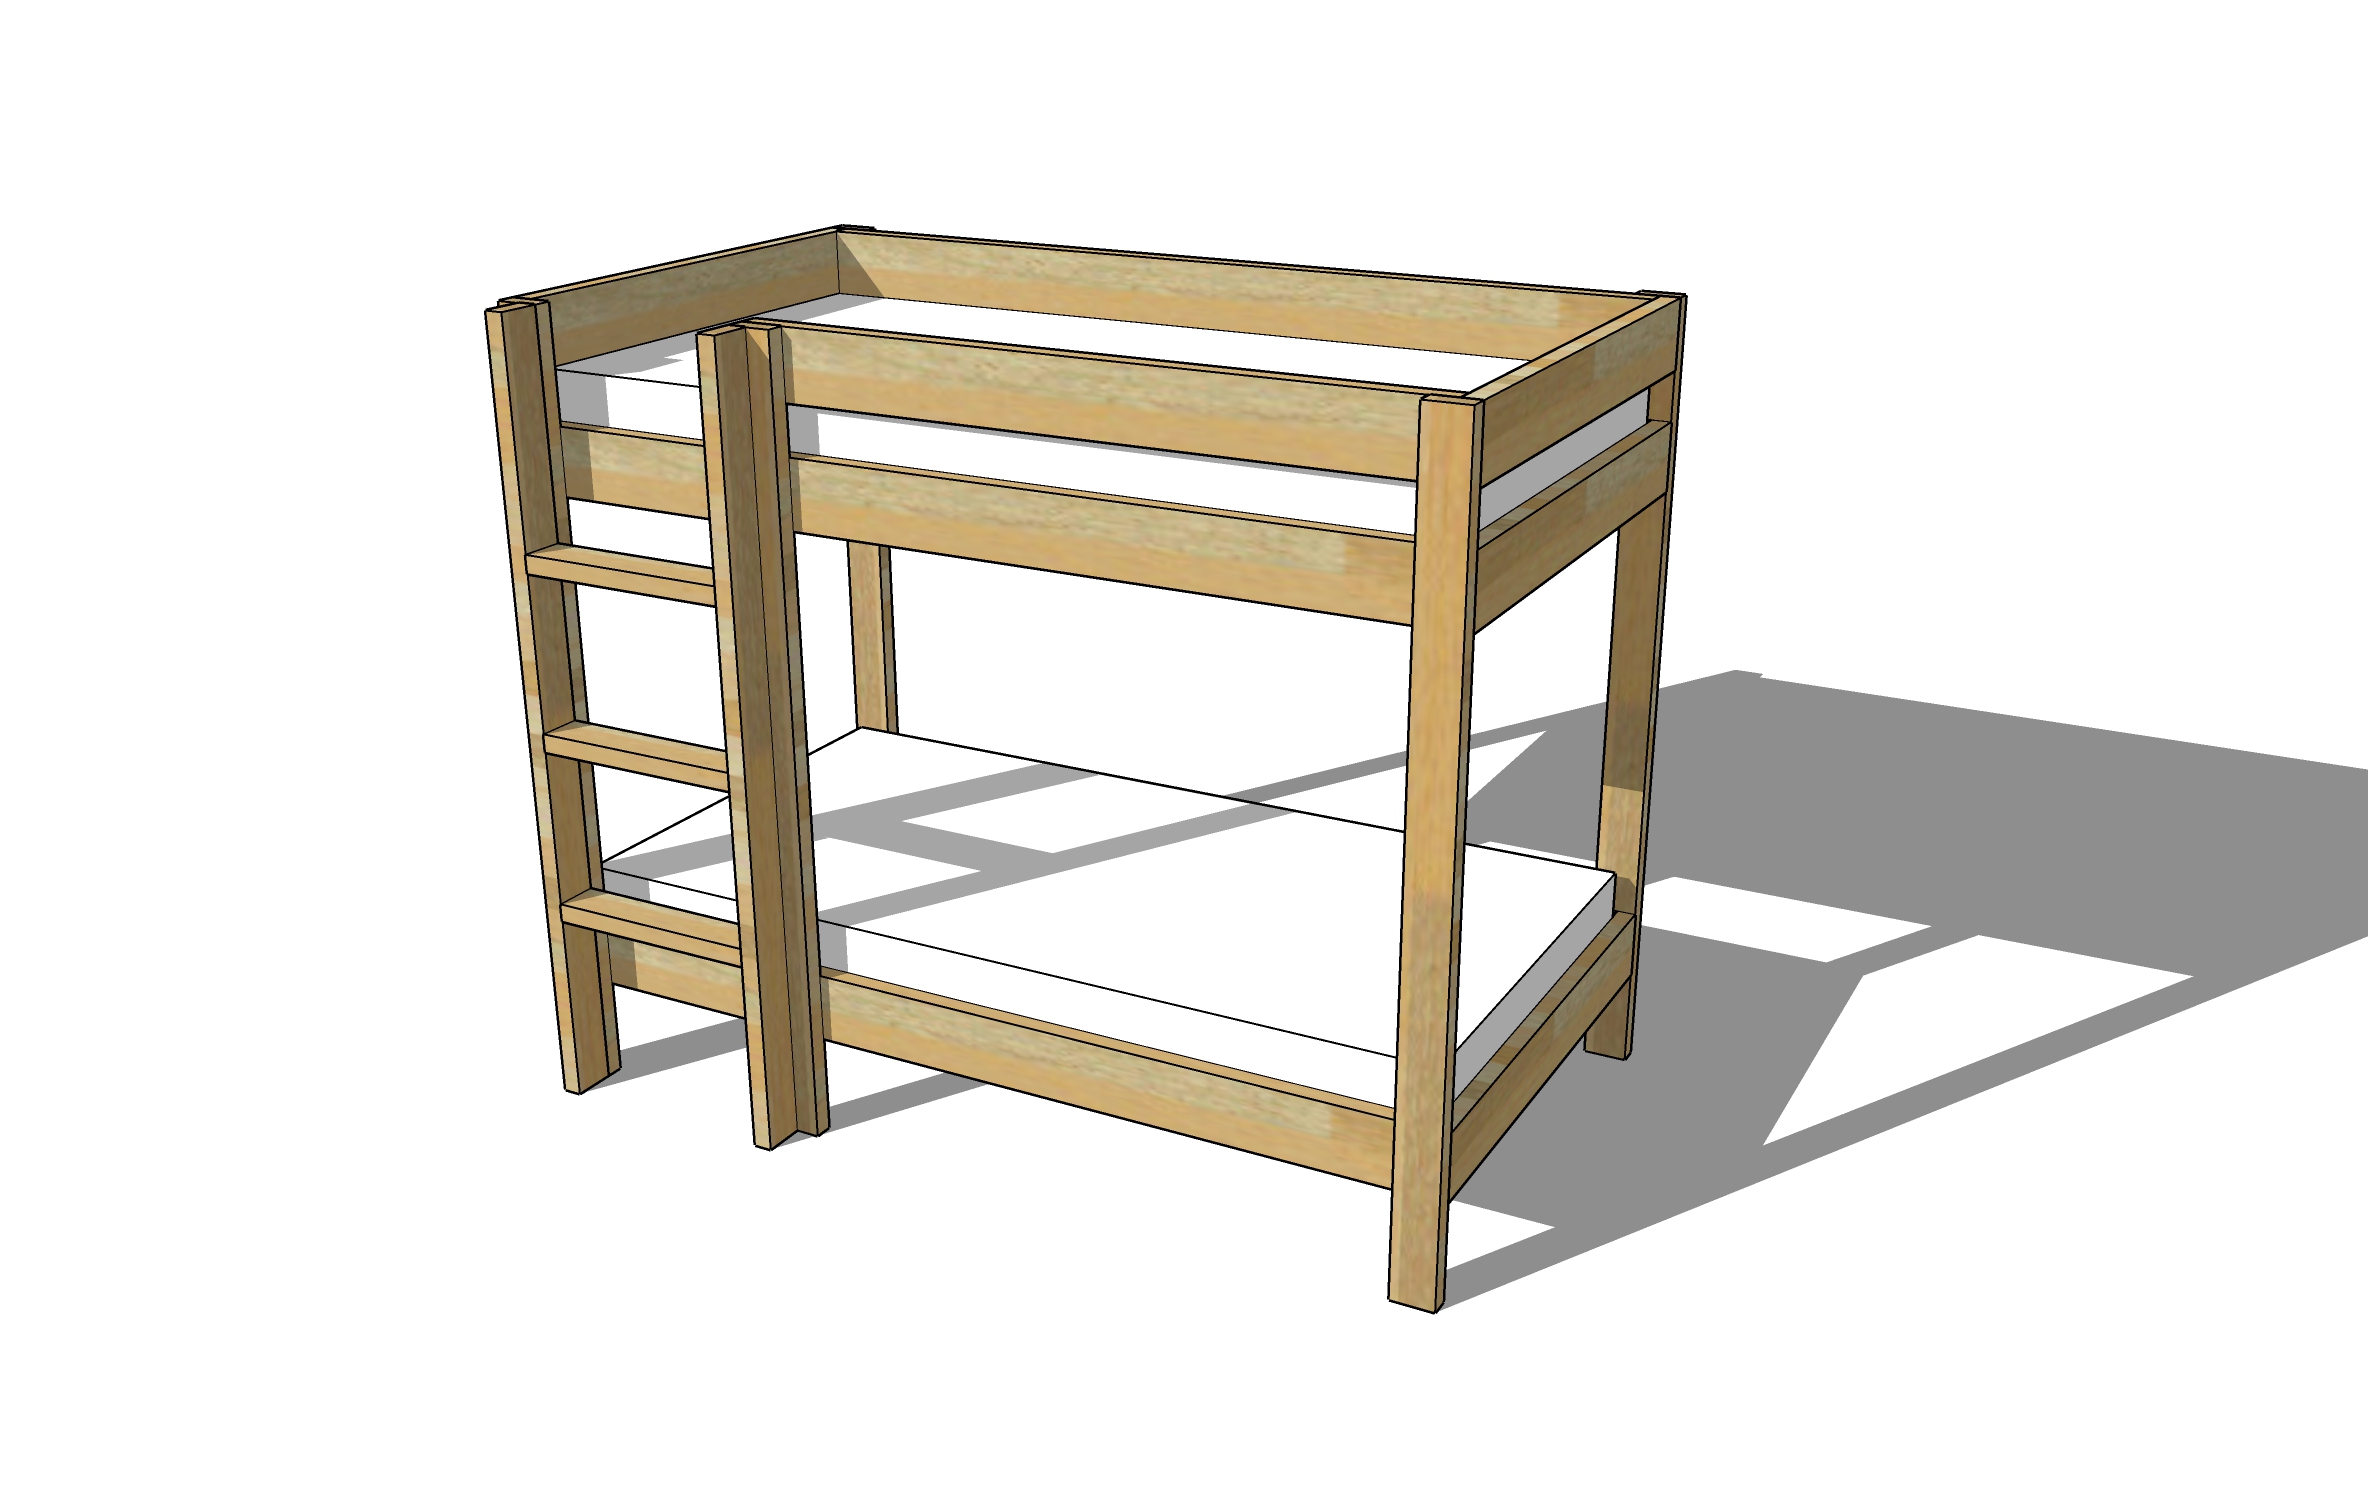 ana white essential bunk bed plans